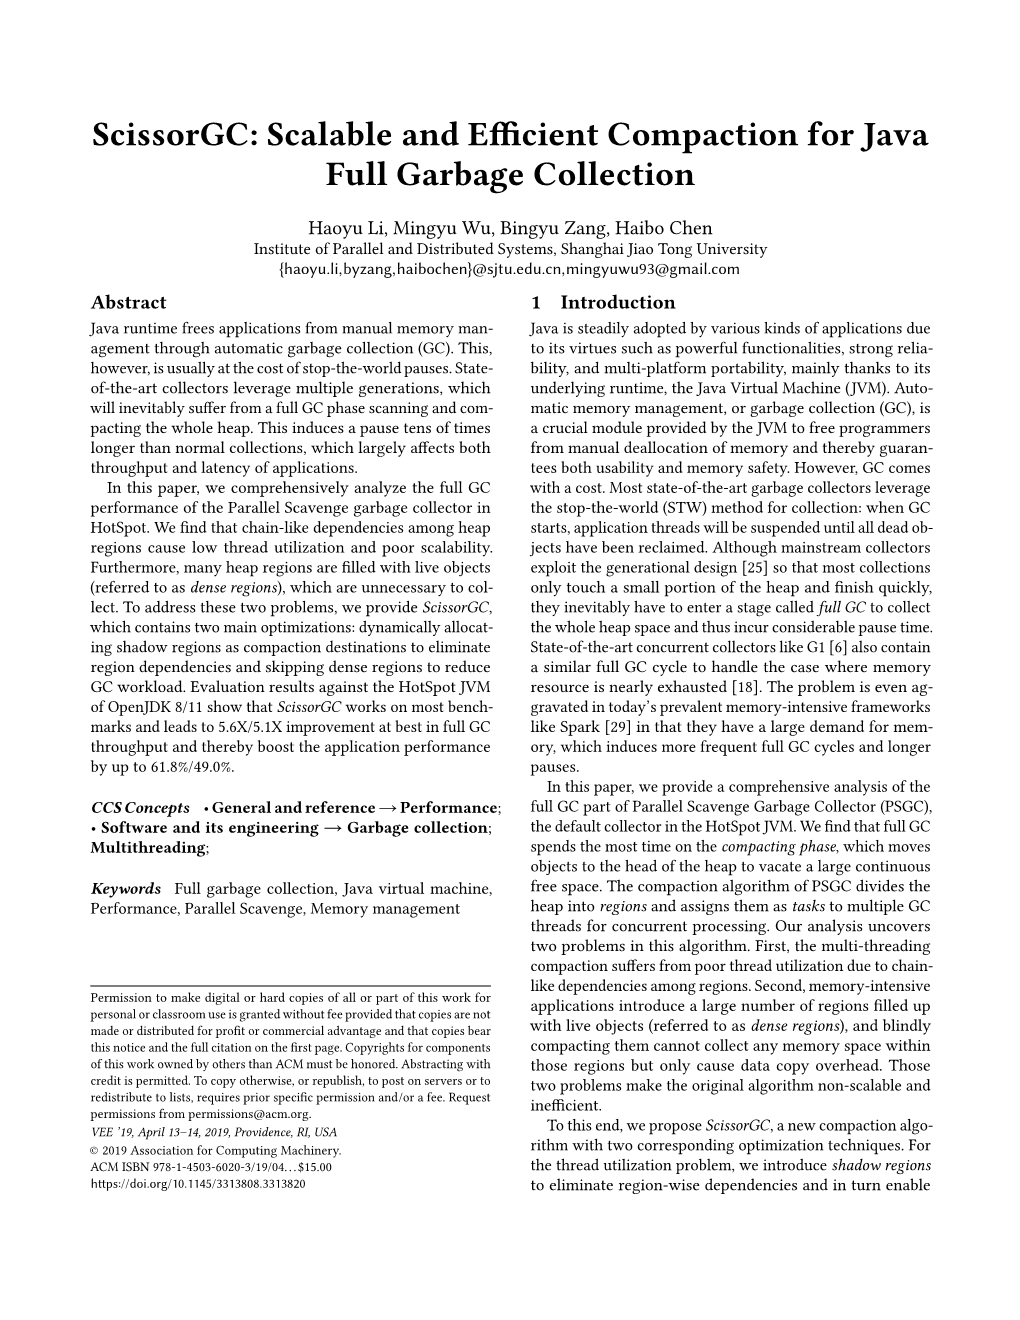 Scissorgc: Scalable and Efficient Compaction for Java Full Garbage Collection